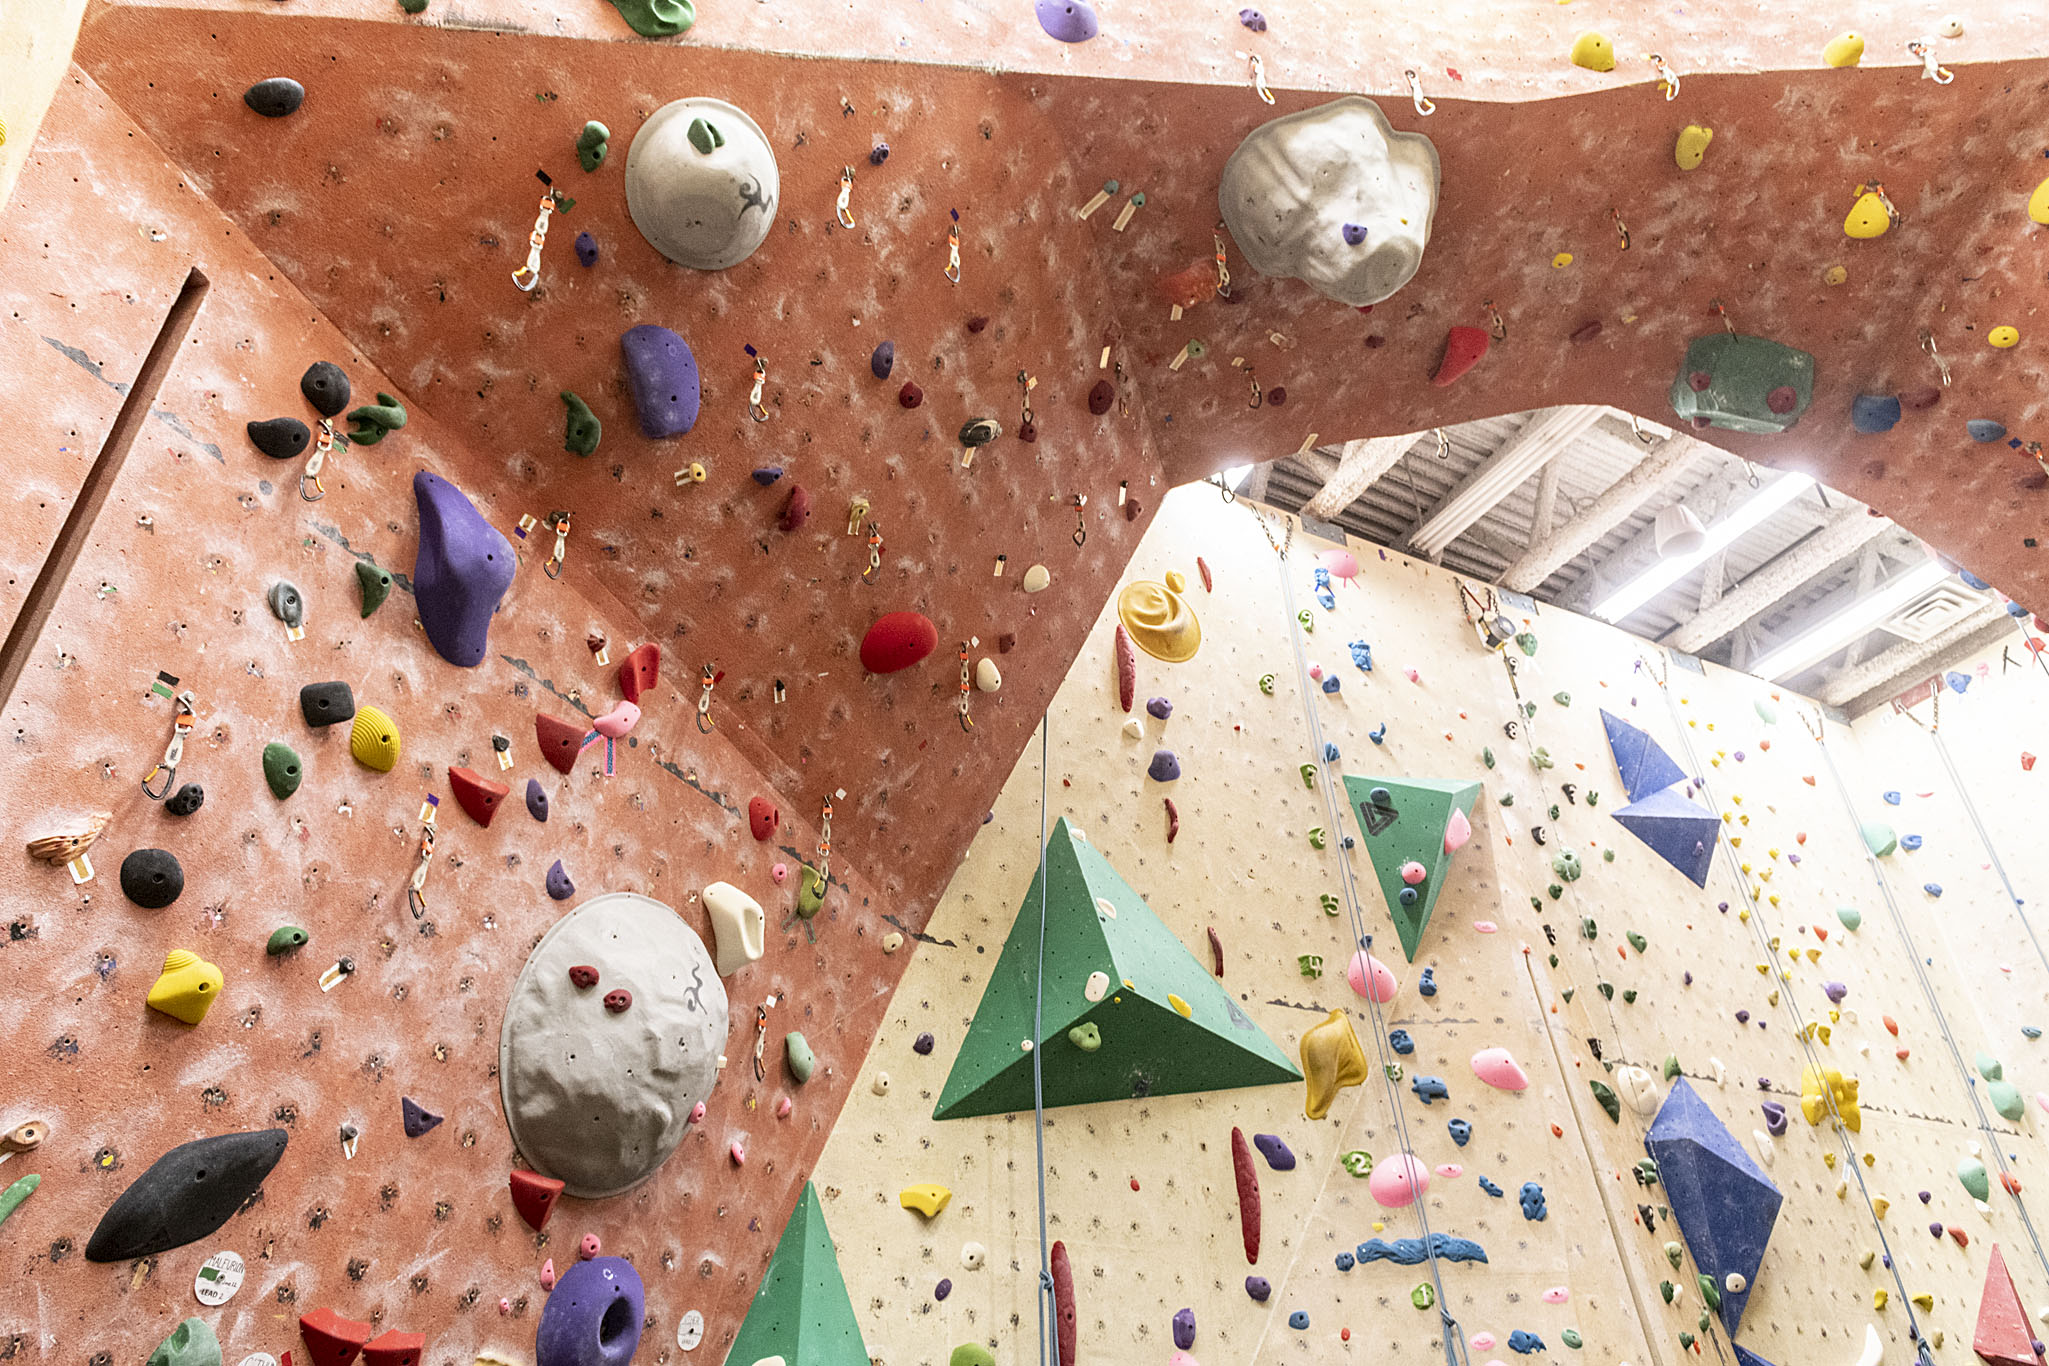 An overview and history of rock climbing - Rock climbing